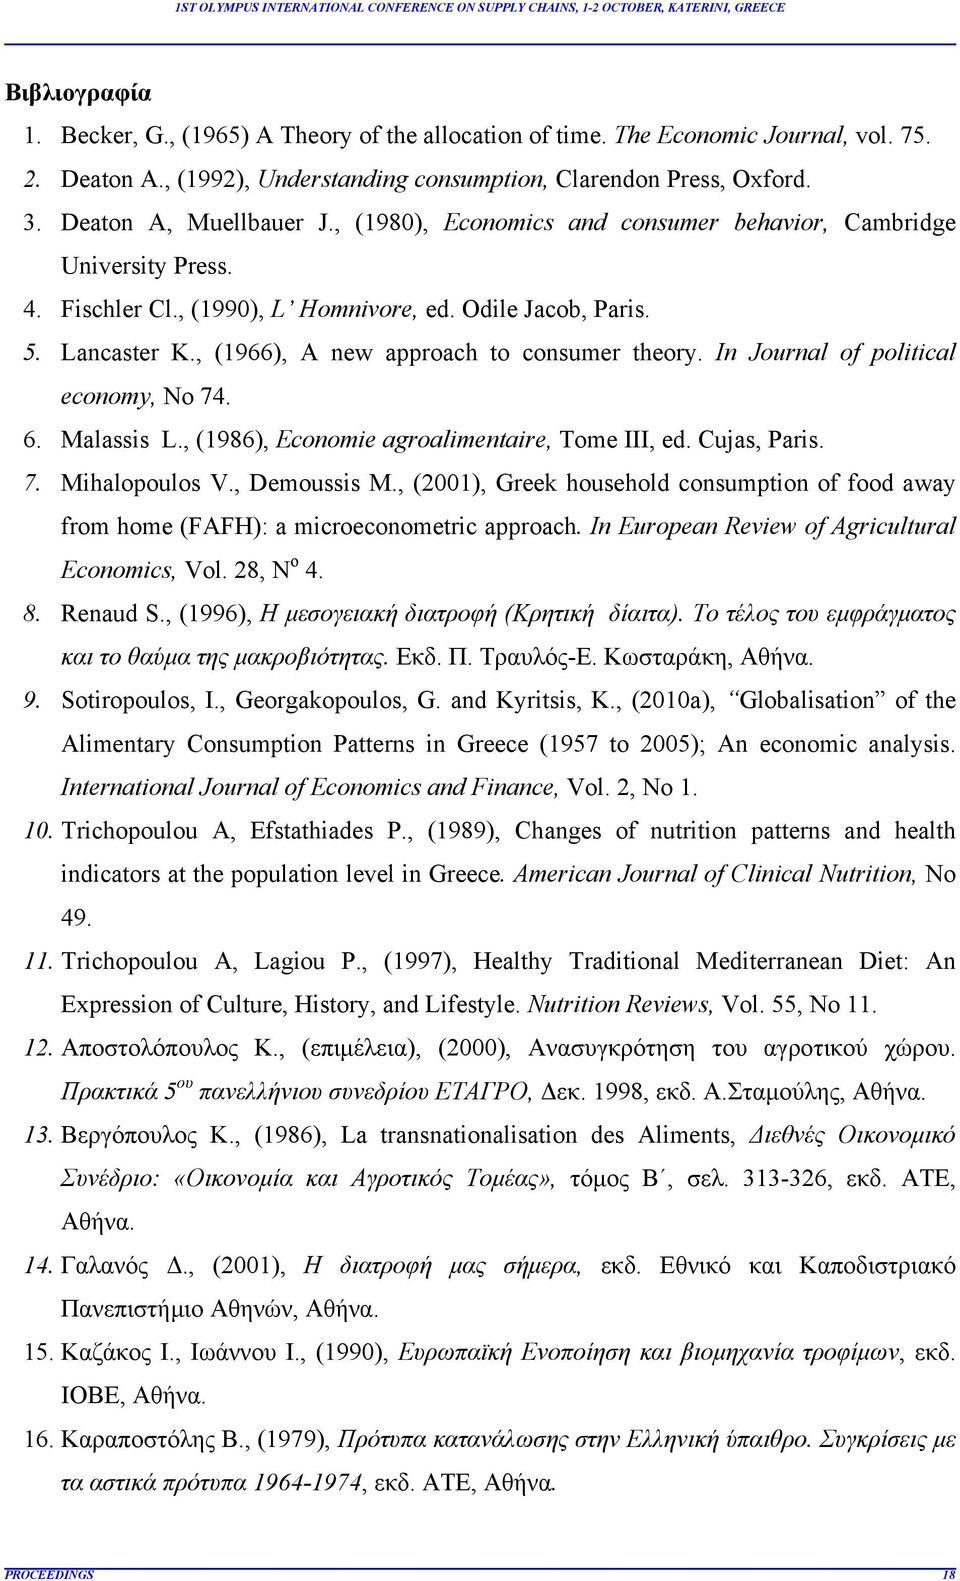 , (1966), A new approach to consumer theory. In Journal of political economy, Νο 74. 6. Malassis L., (1986), Economie agroalimentaire, Tome III, ed. Cujas, Paris. 7. Mihalopoulos V., Demoussis M.